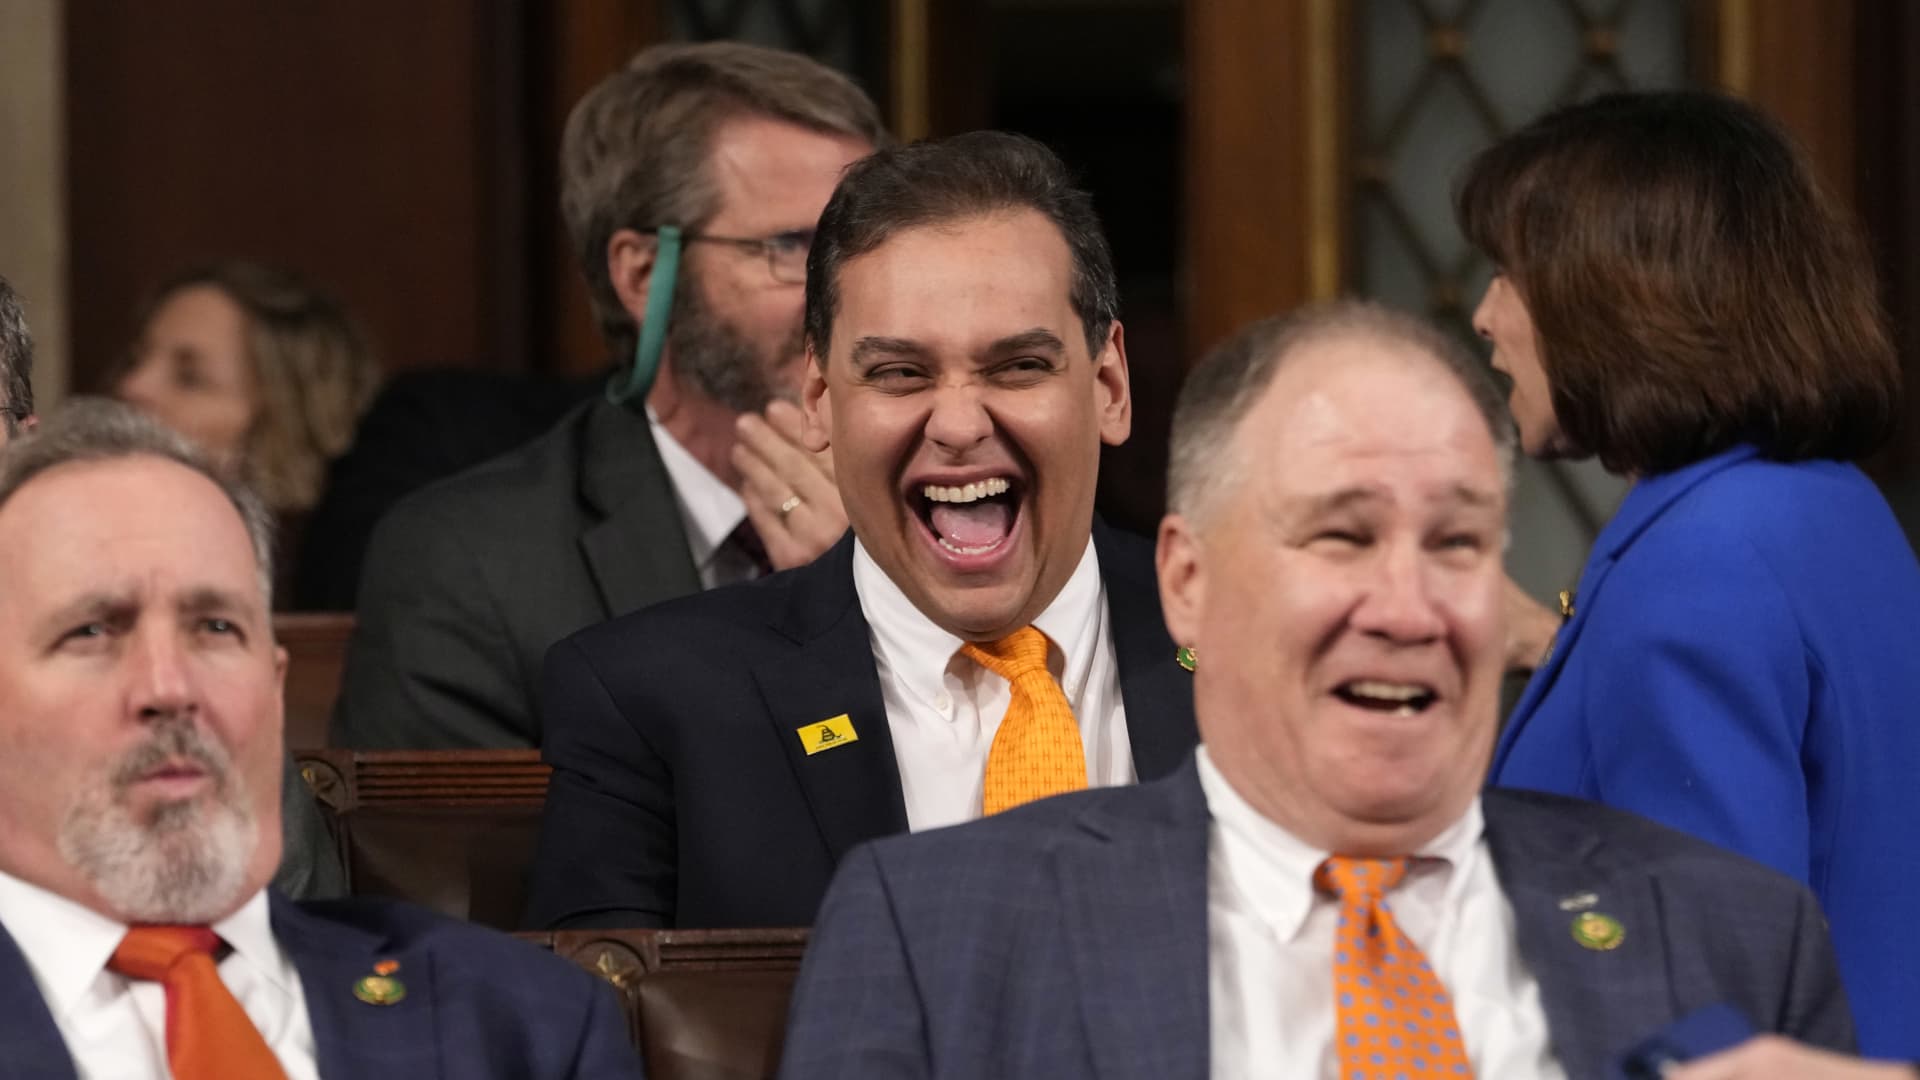 Representative George Santos, a Republican from New York, center, ahead of a State of the Union address at the US Capitol in Washington, DC, US, on Tuesday, Feb. 7, 2023.